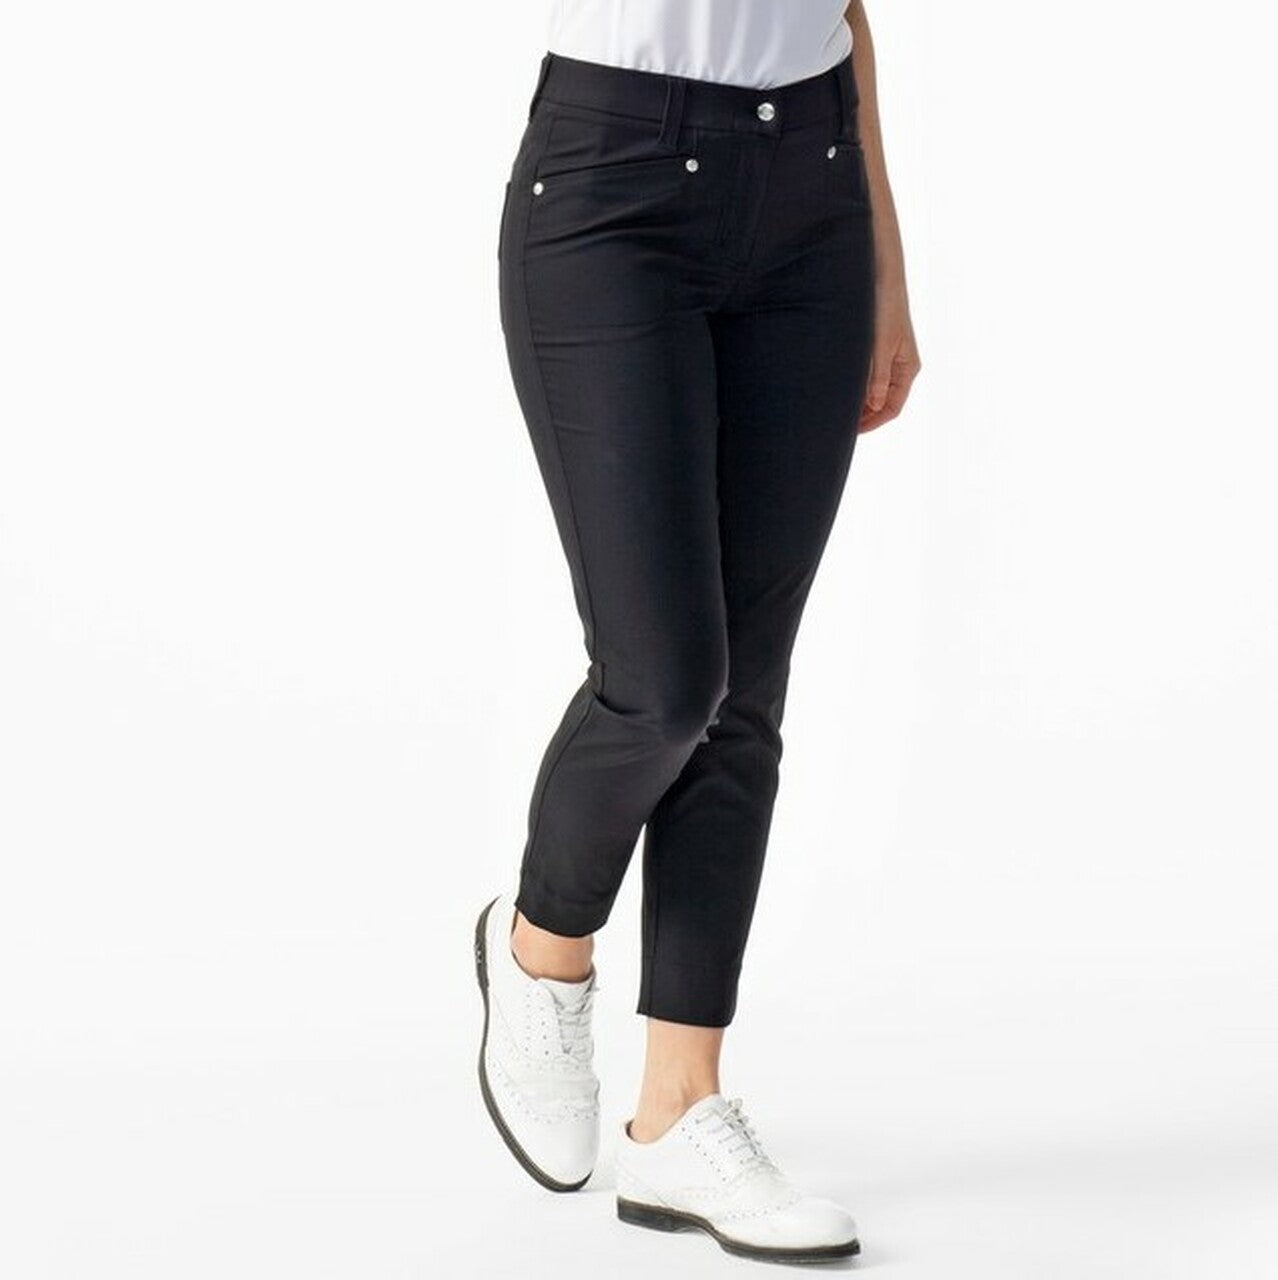 Daily Sports- Lyric Highwater Ankle Pants Black (Style#: 001/263